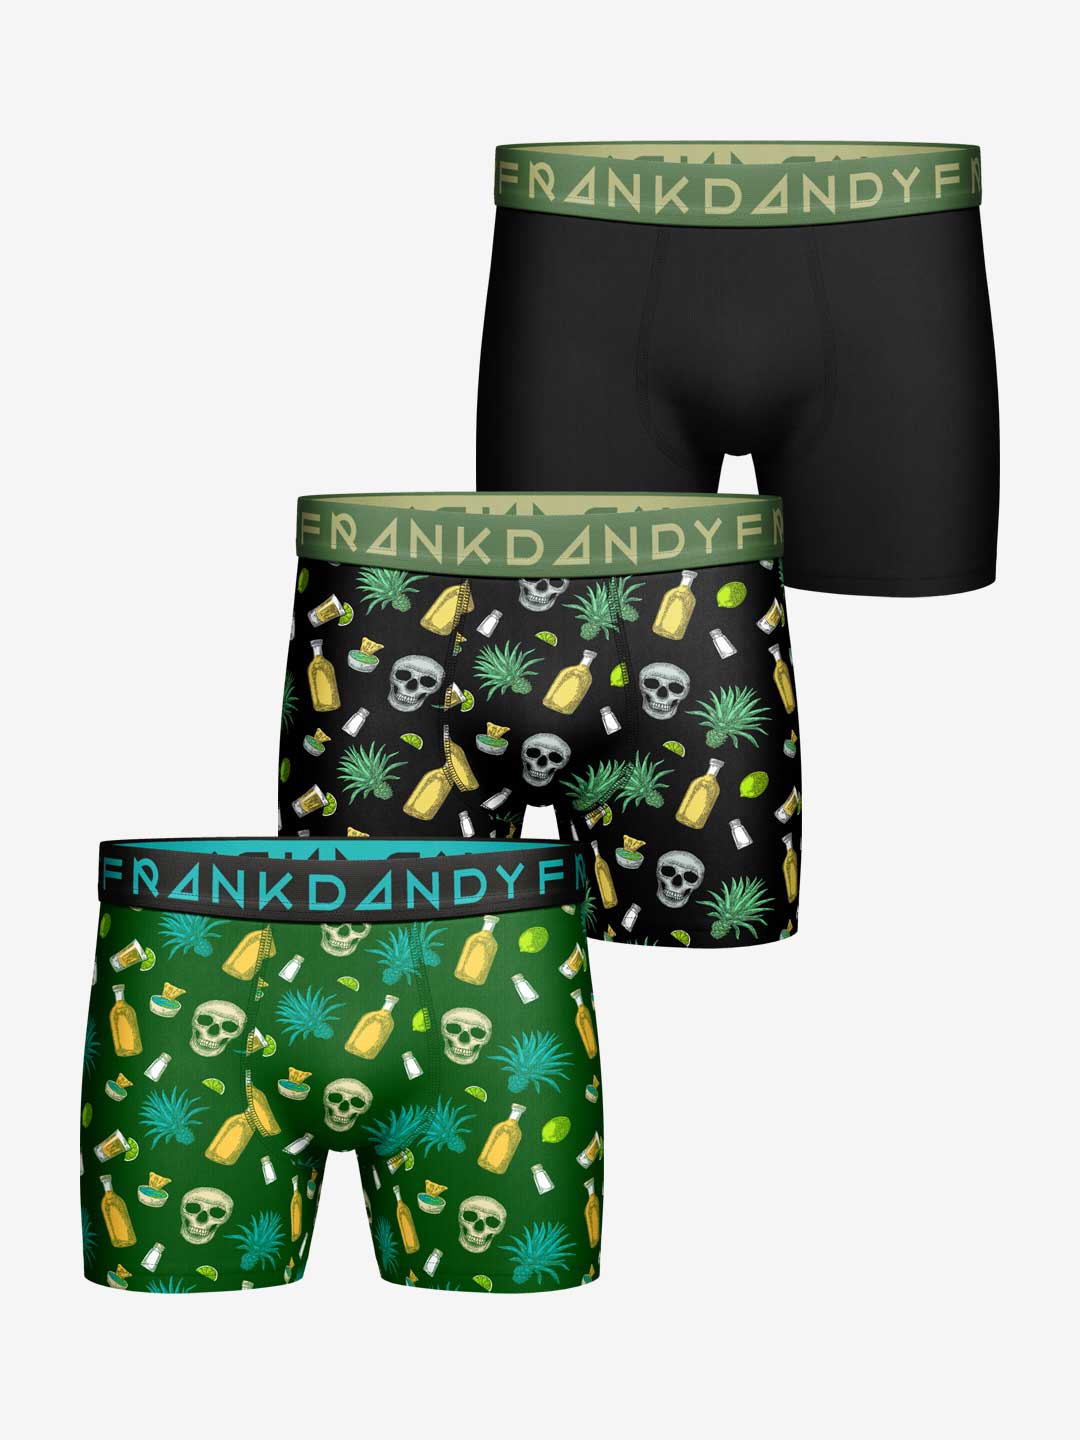 Frank Dandy 3-Pack Tequila Boxer